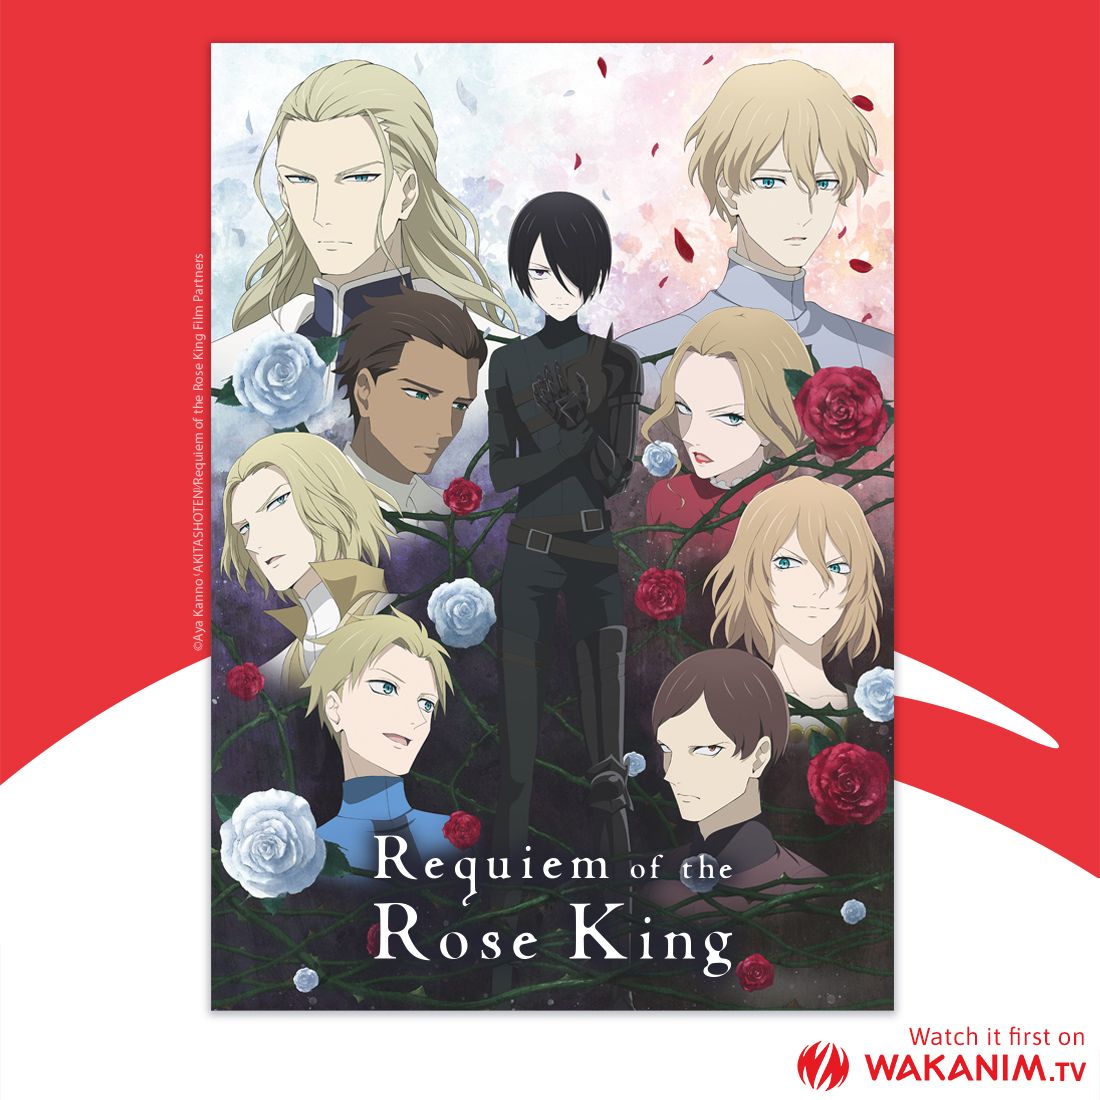 Requiem_of_the_rose_king_anime_annonce_wakanim.jpg